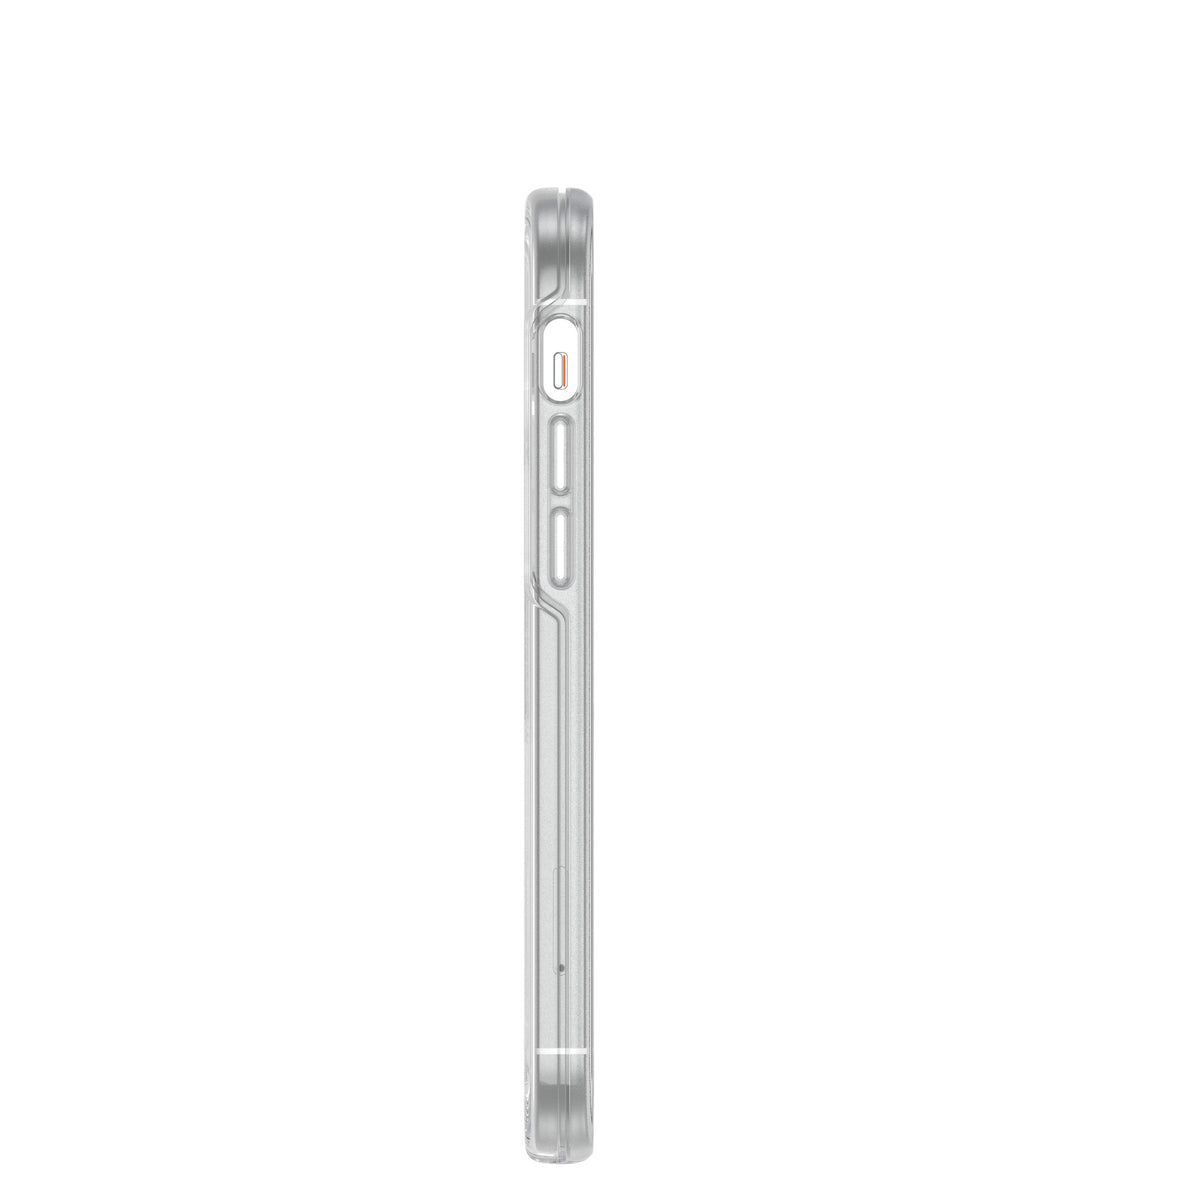 OtterBox Symmetry Clear Series for iPhone 12/ 12 Pro in Transparent